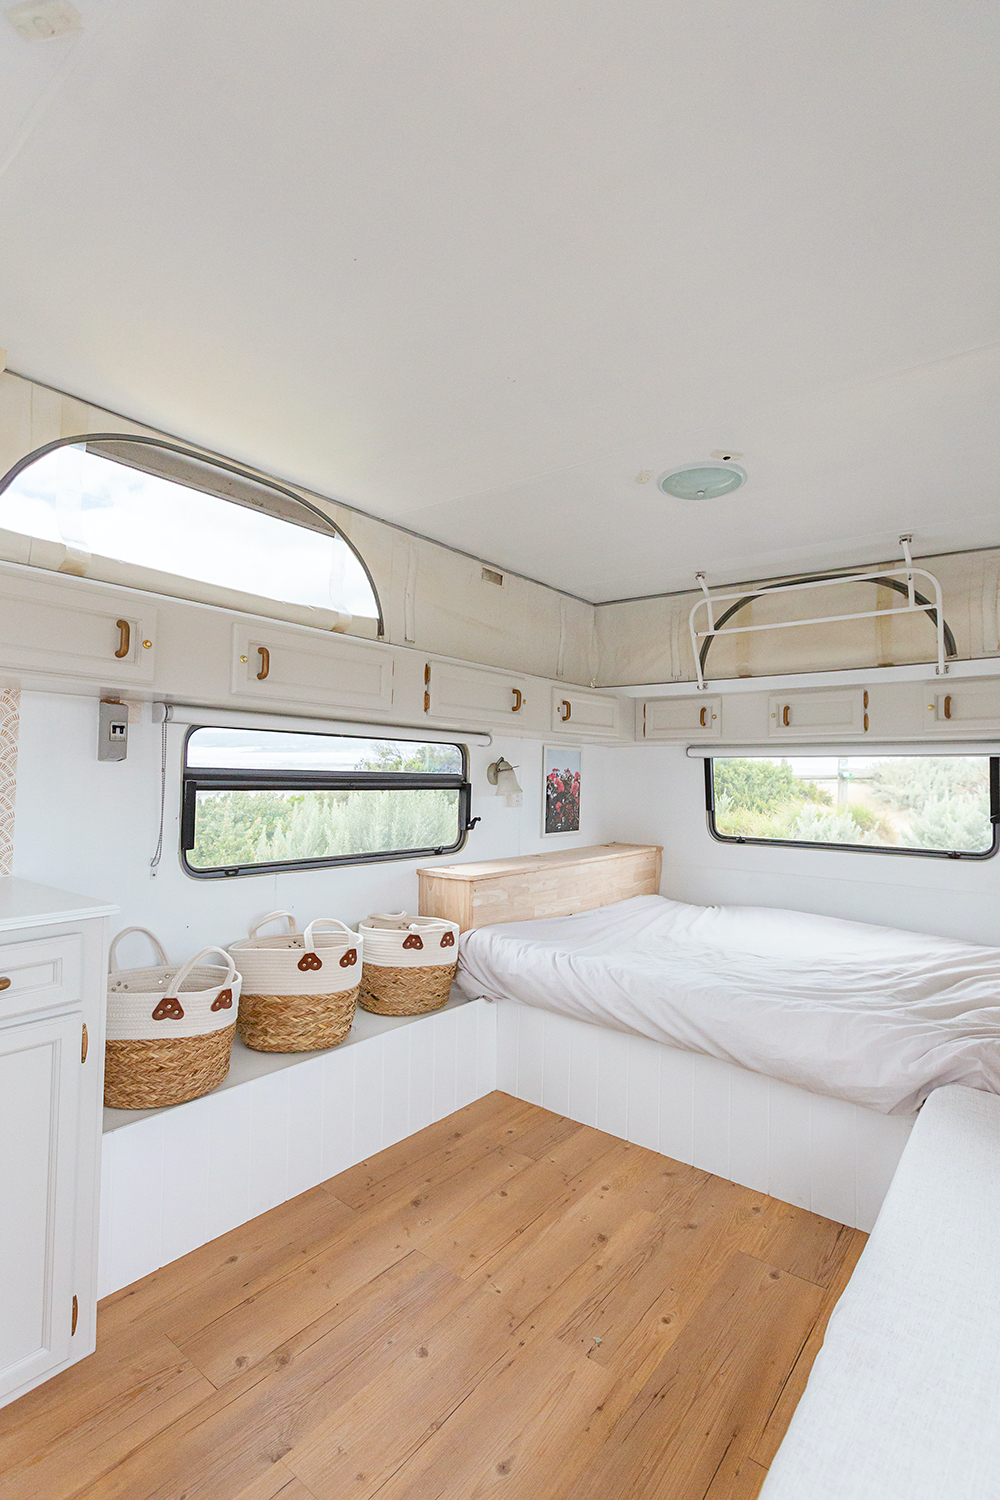 White interior of a renovated caravan showing the bed and storage baskets